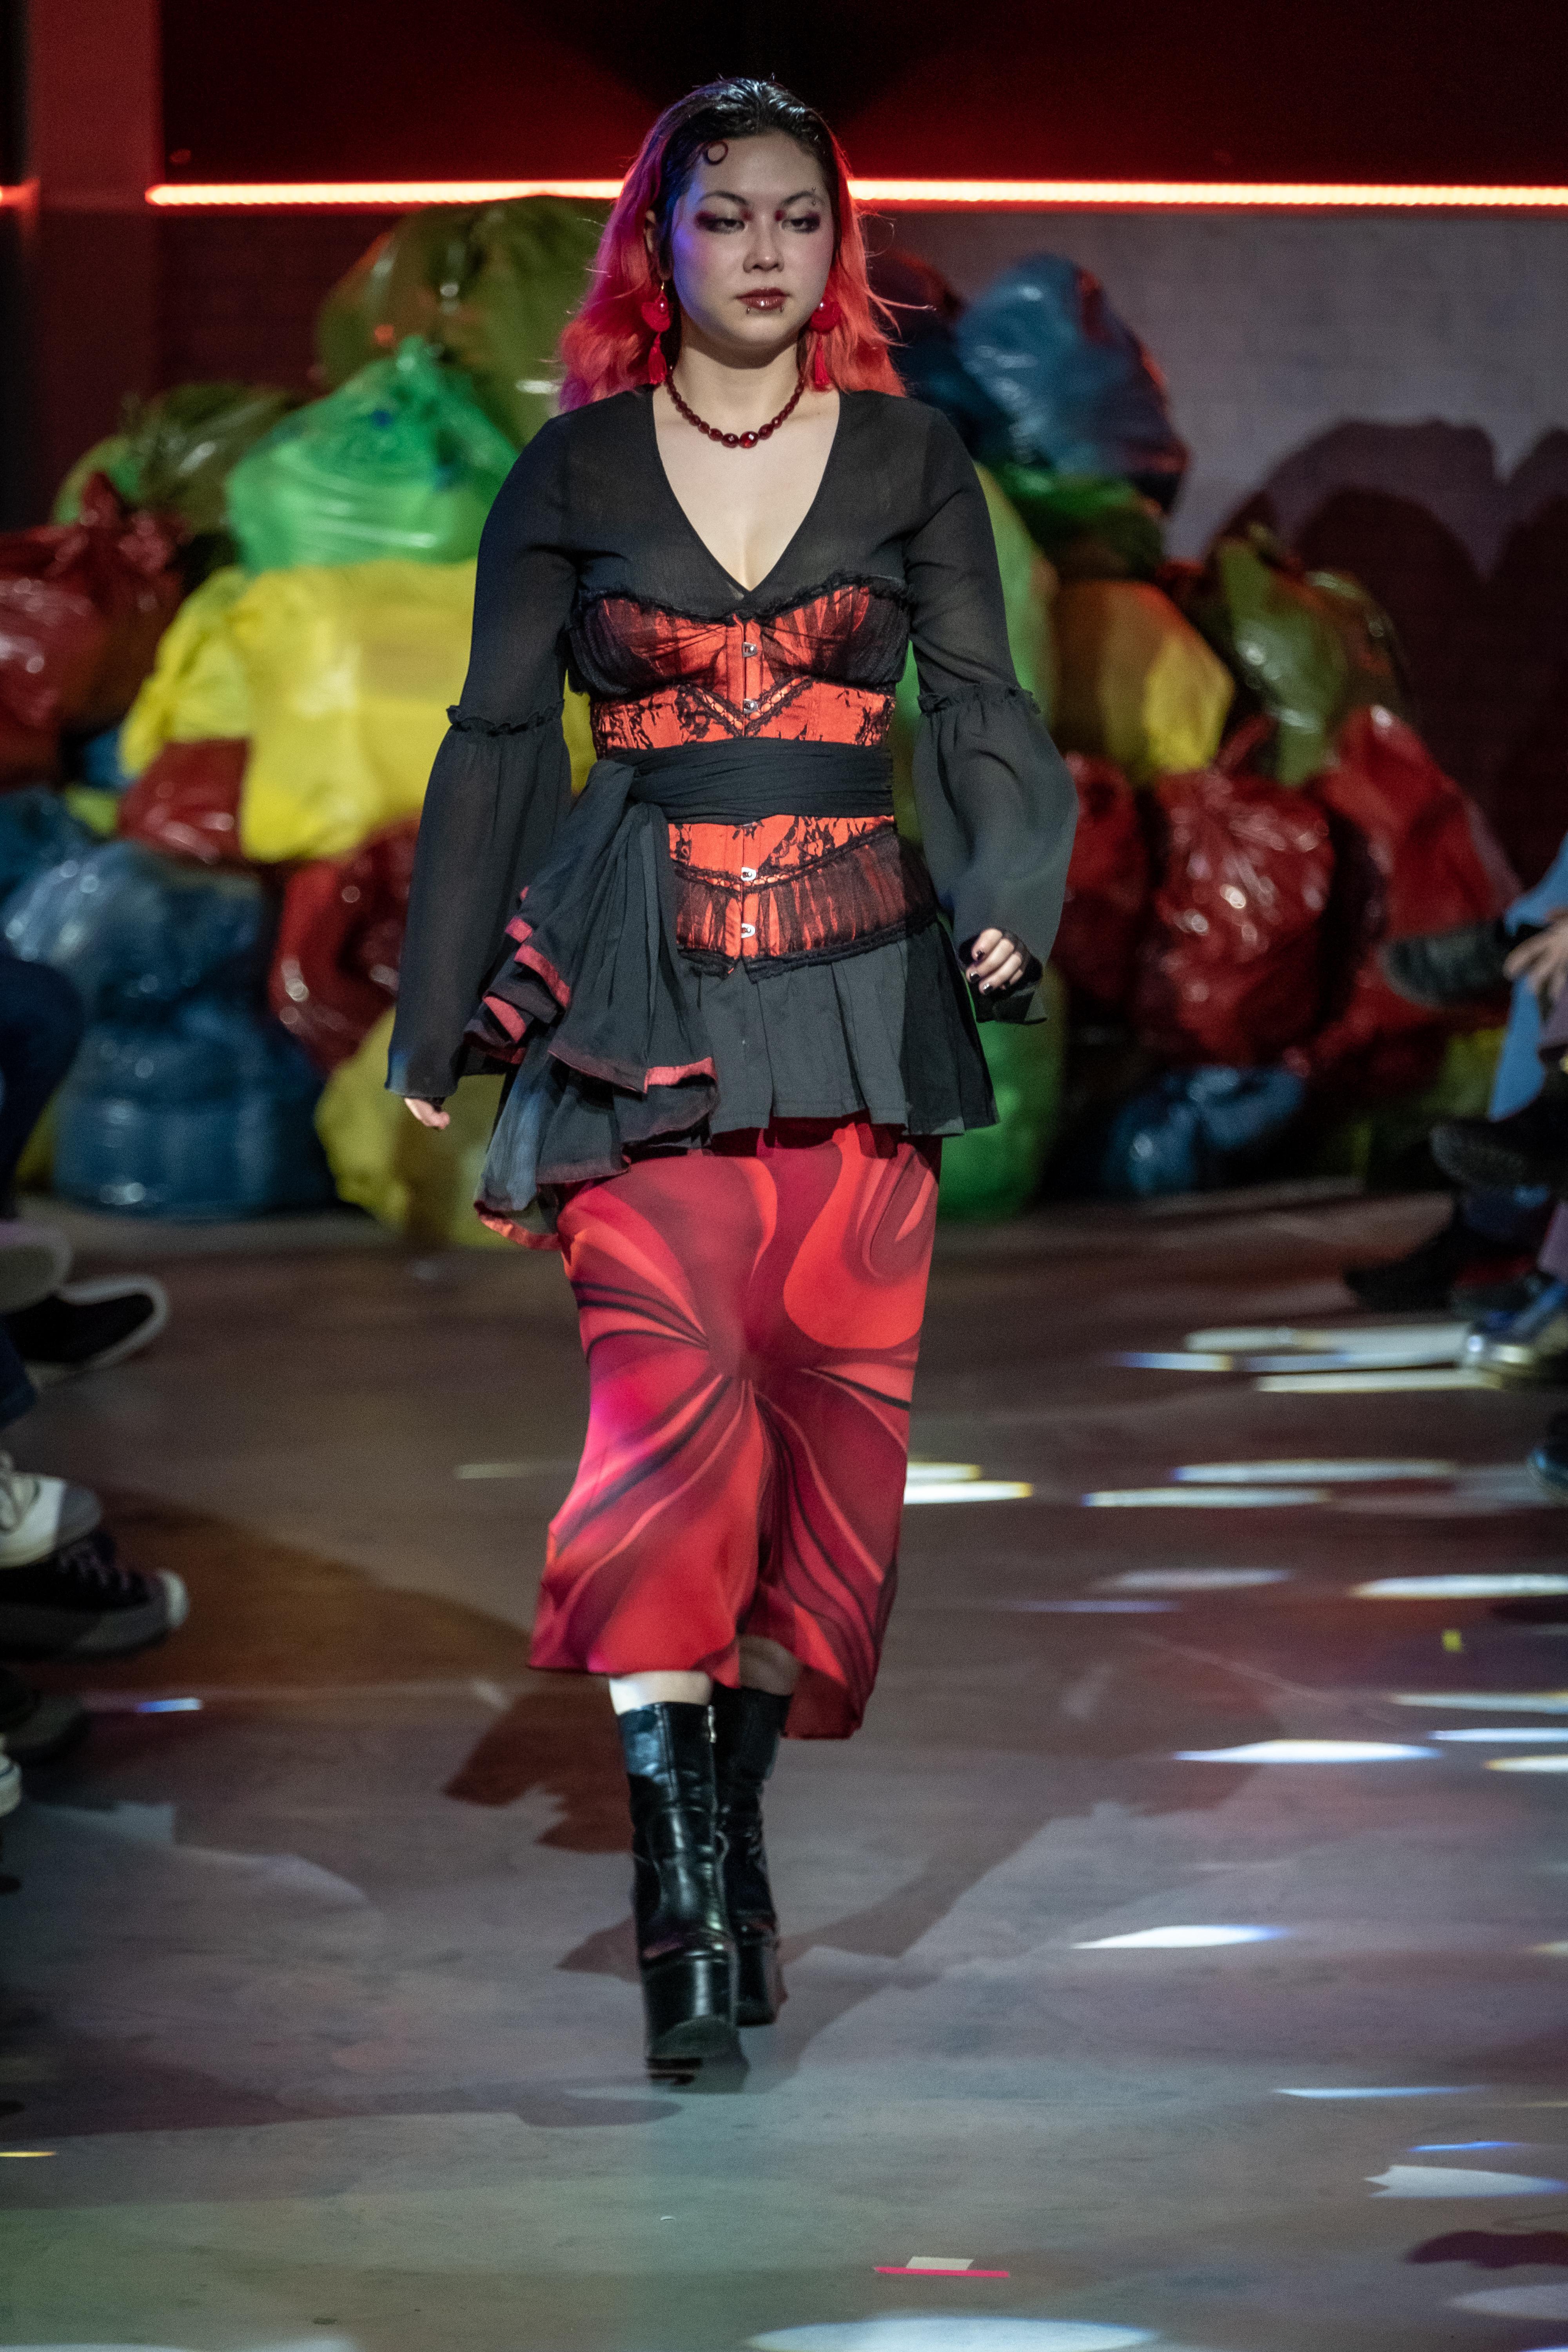 A model walks the runway in a black and red outfit